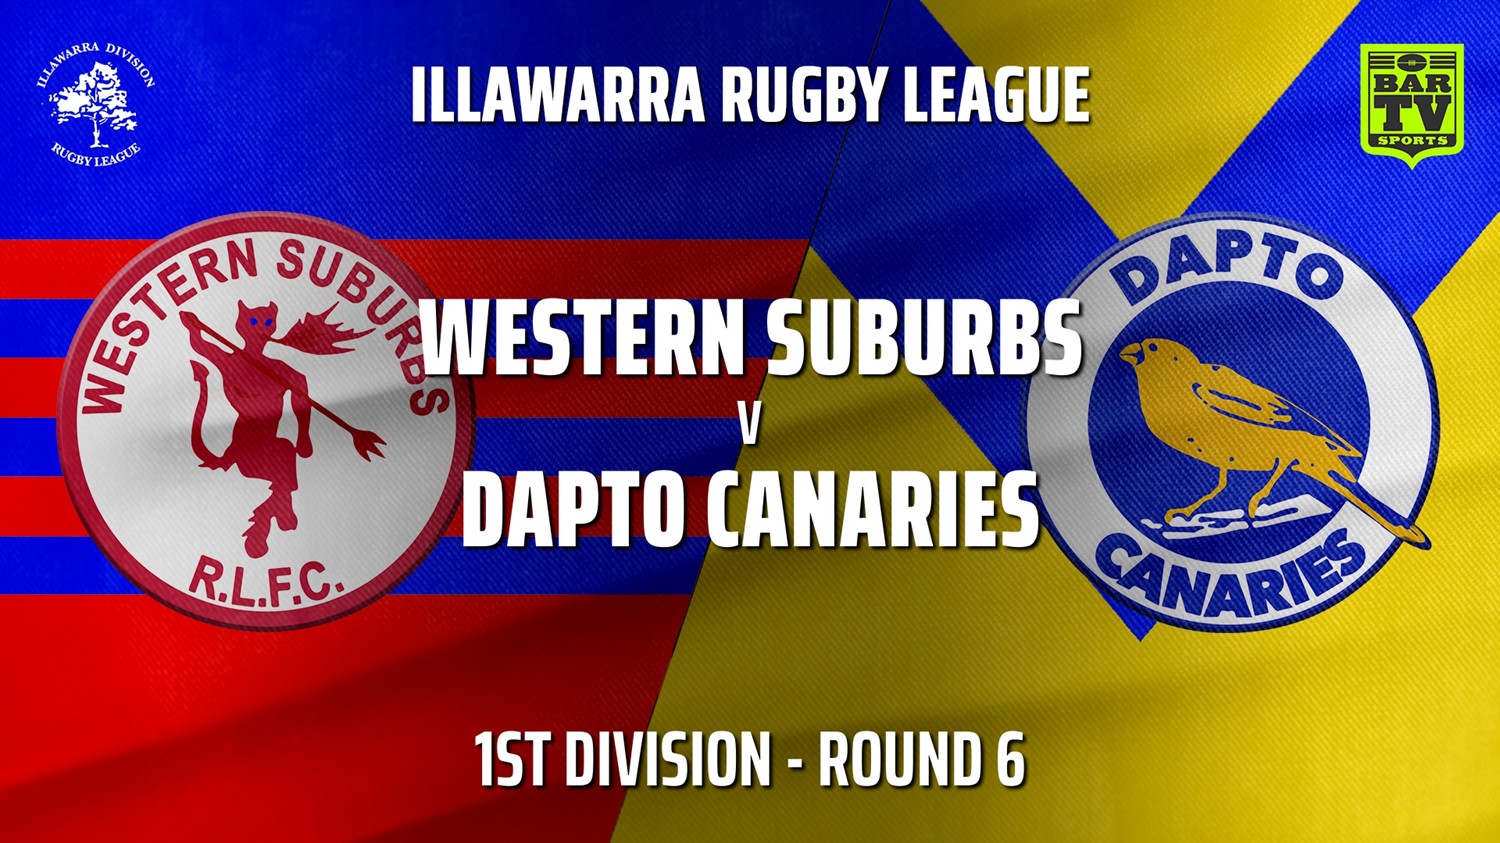 210522-IRL Round 6 - 1st Division - Western Suburbs Devils v Dapto Canaries Slate Image